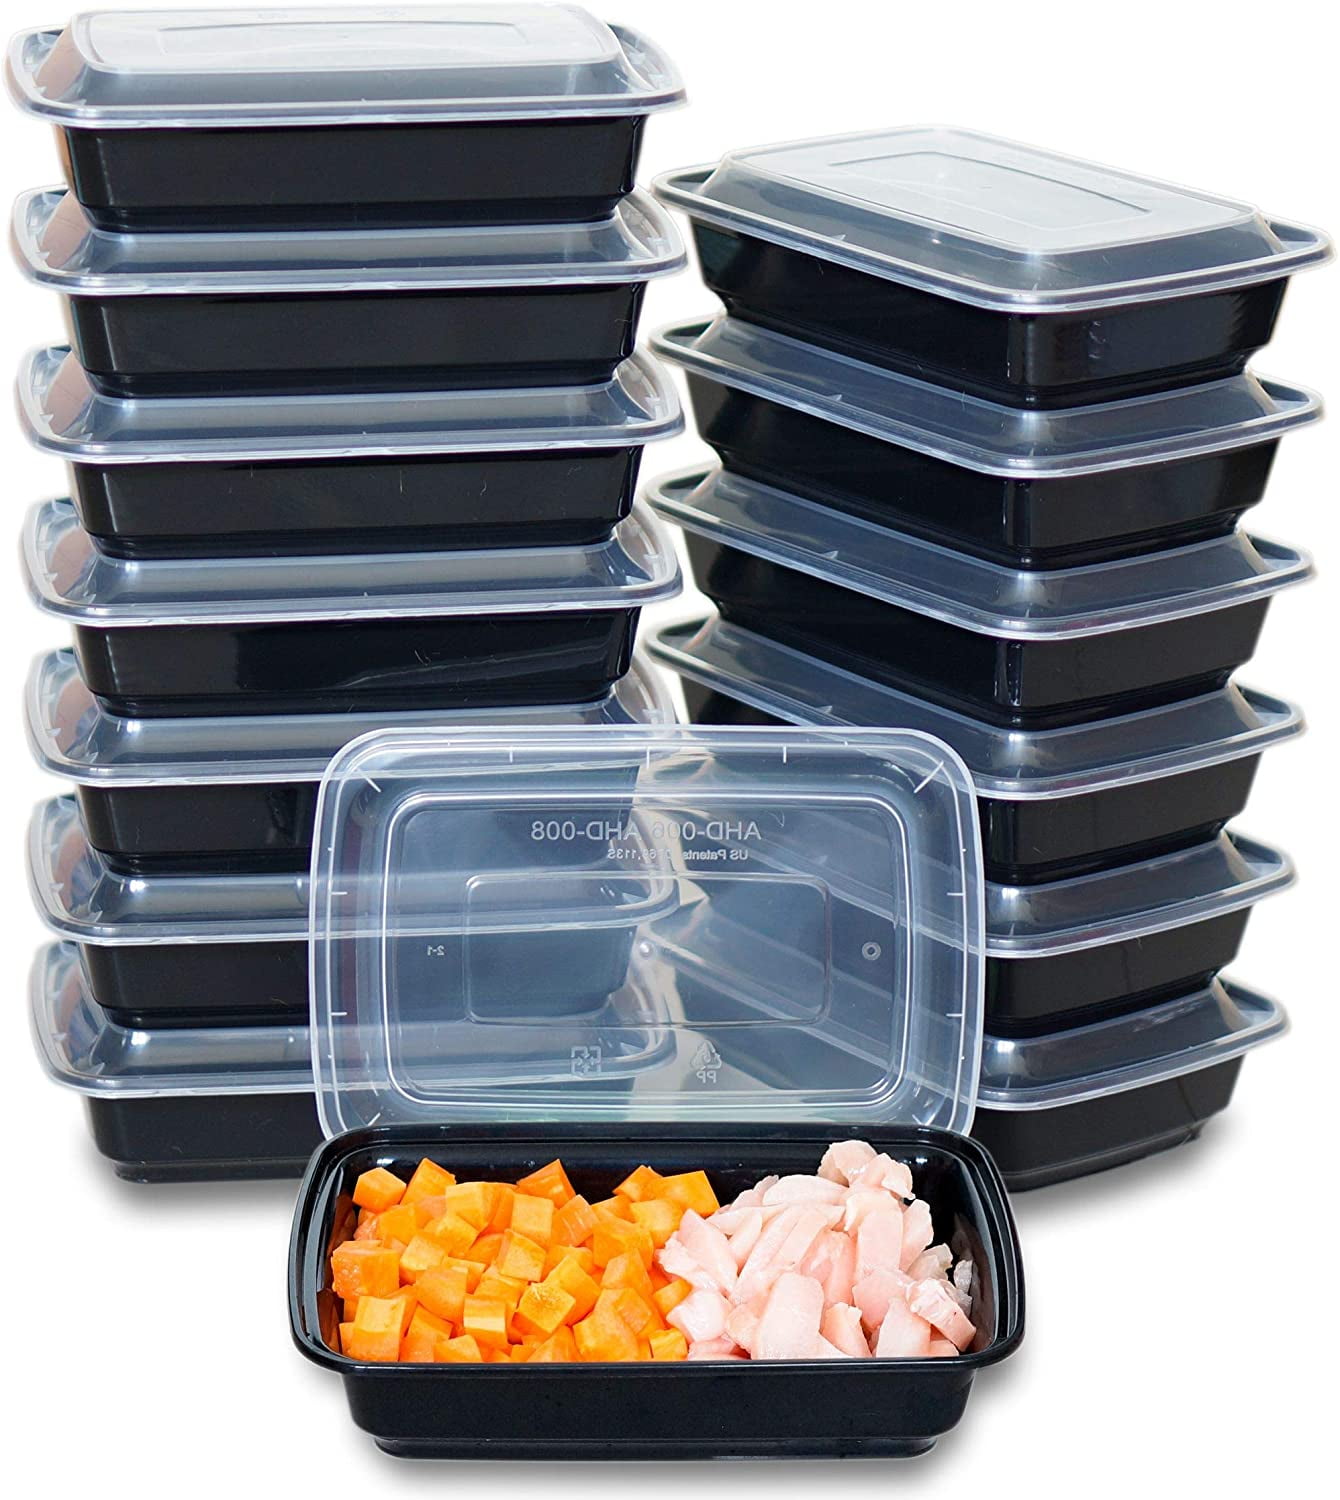 CTC-8366] 1 Compartment Rectangular Meal Prep Container with Lids